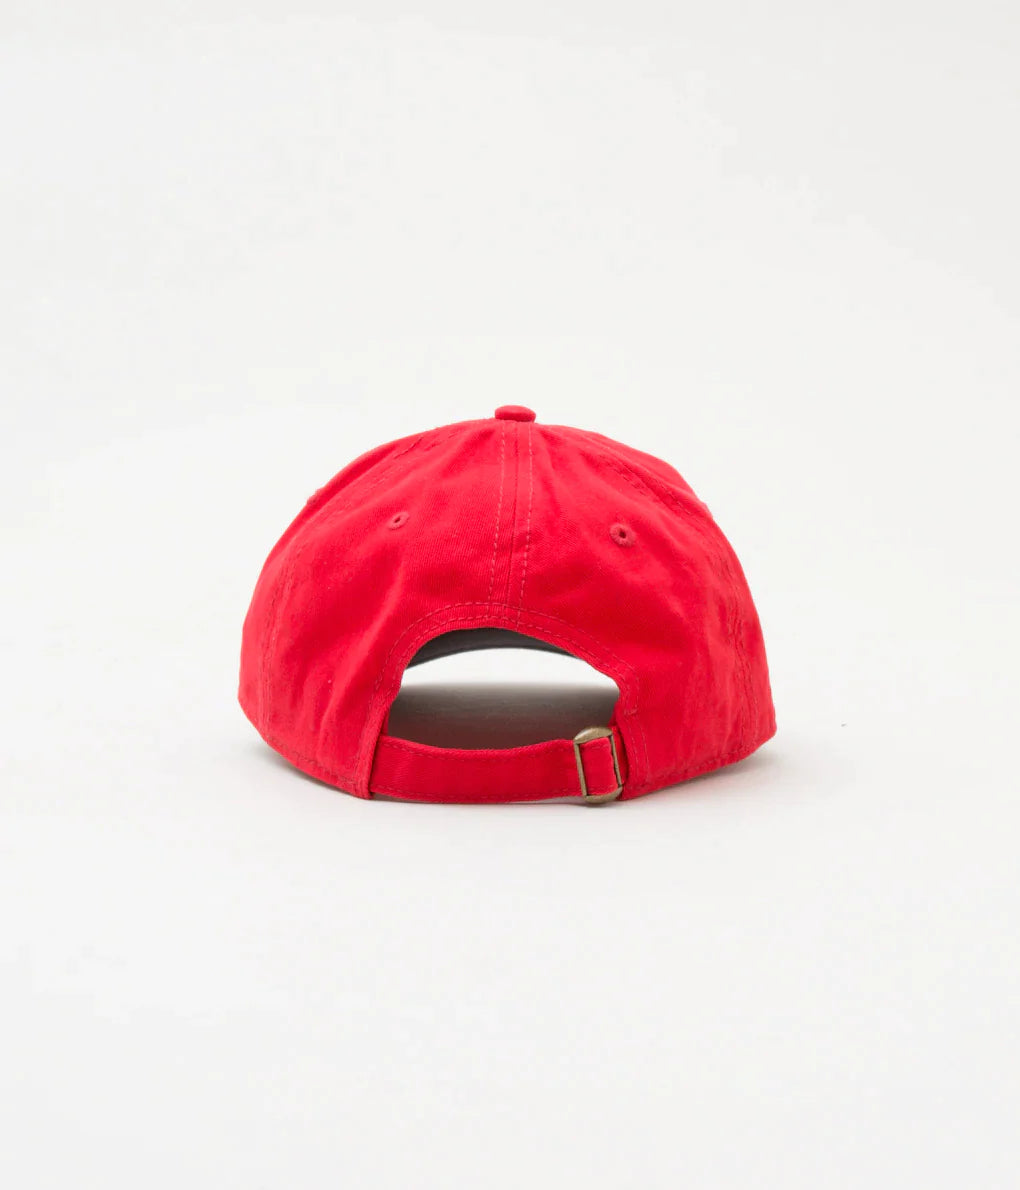 BLUESCENTRIC "WOODSTOCK HAT" (RED)